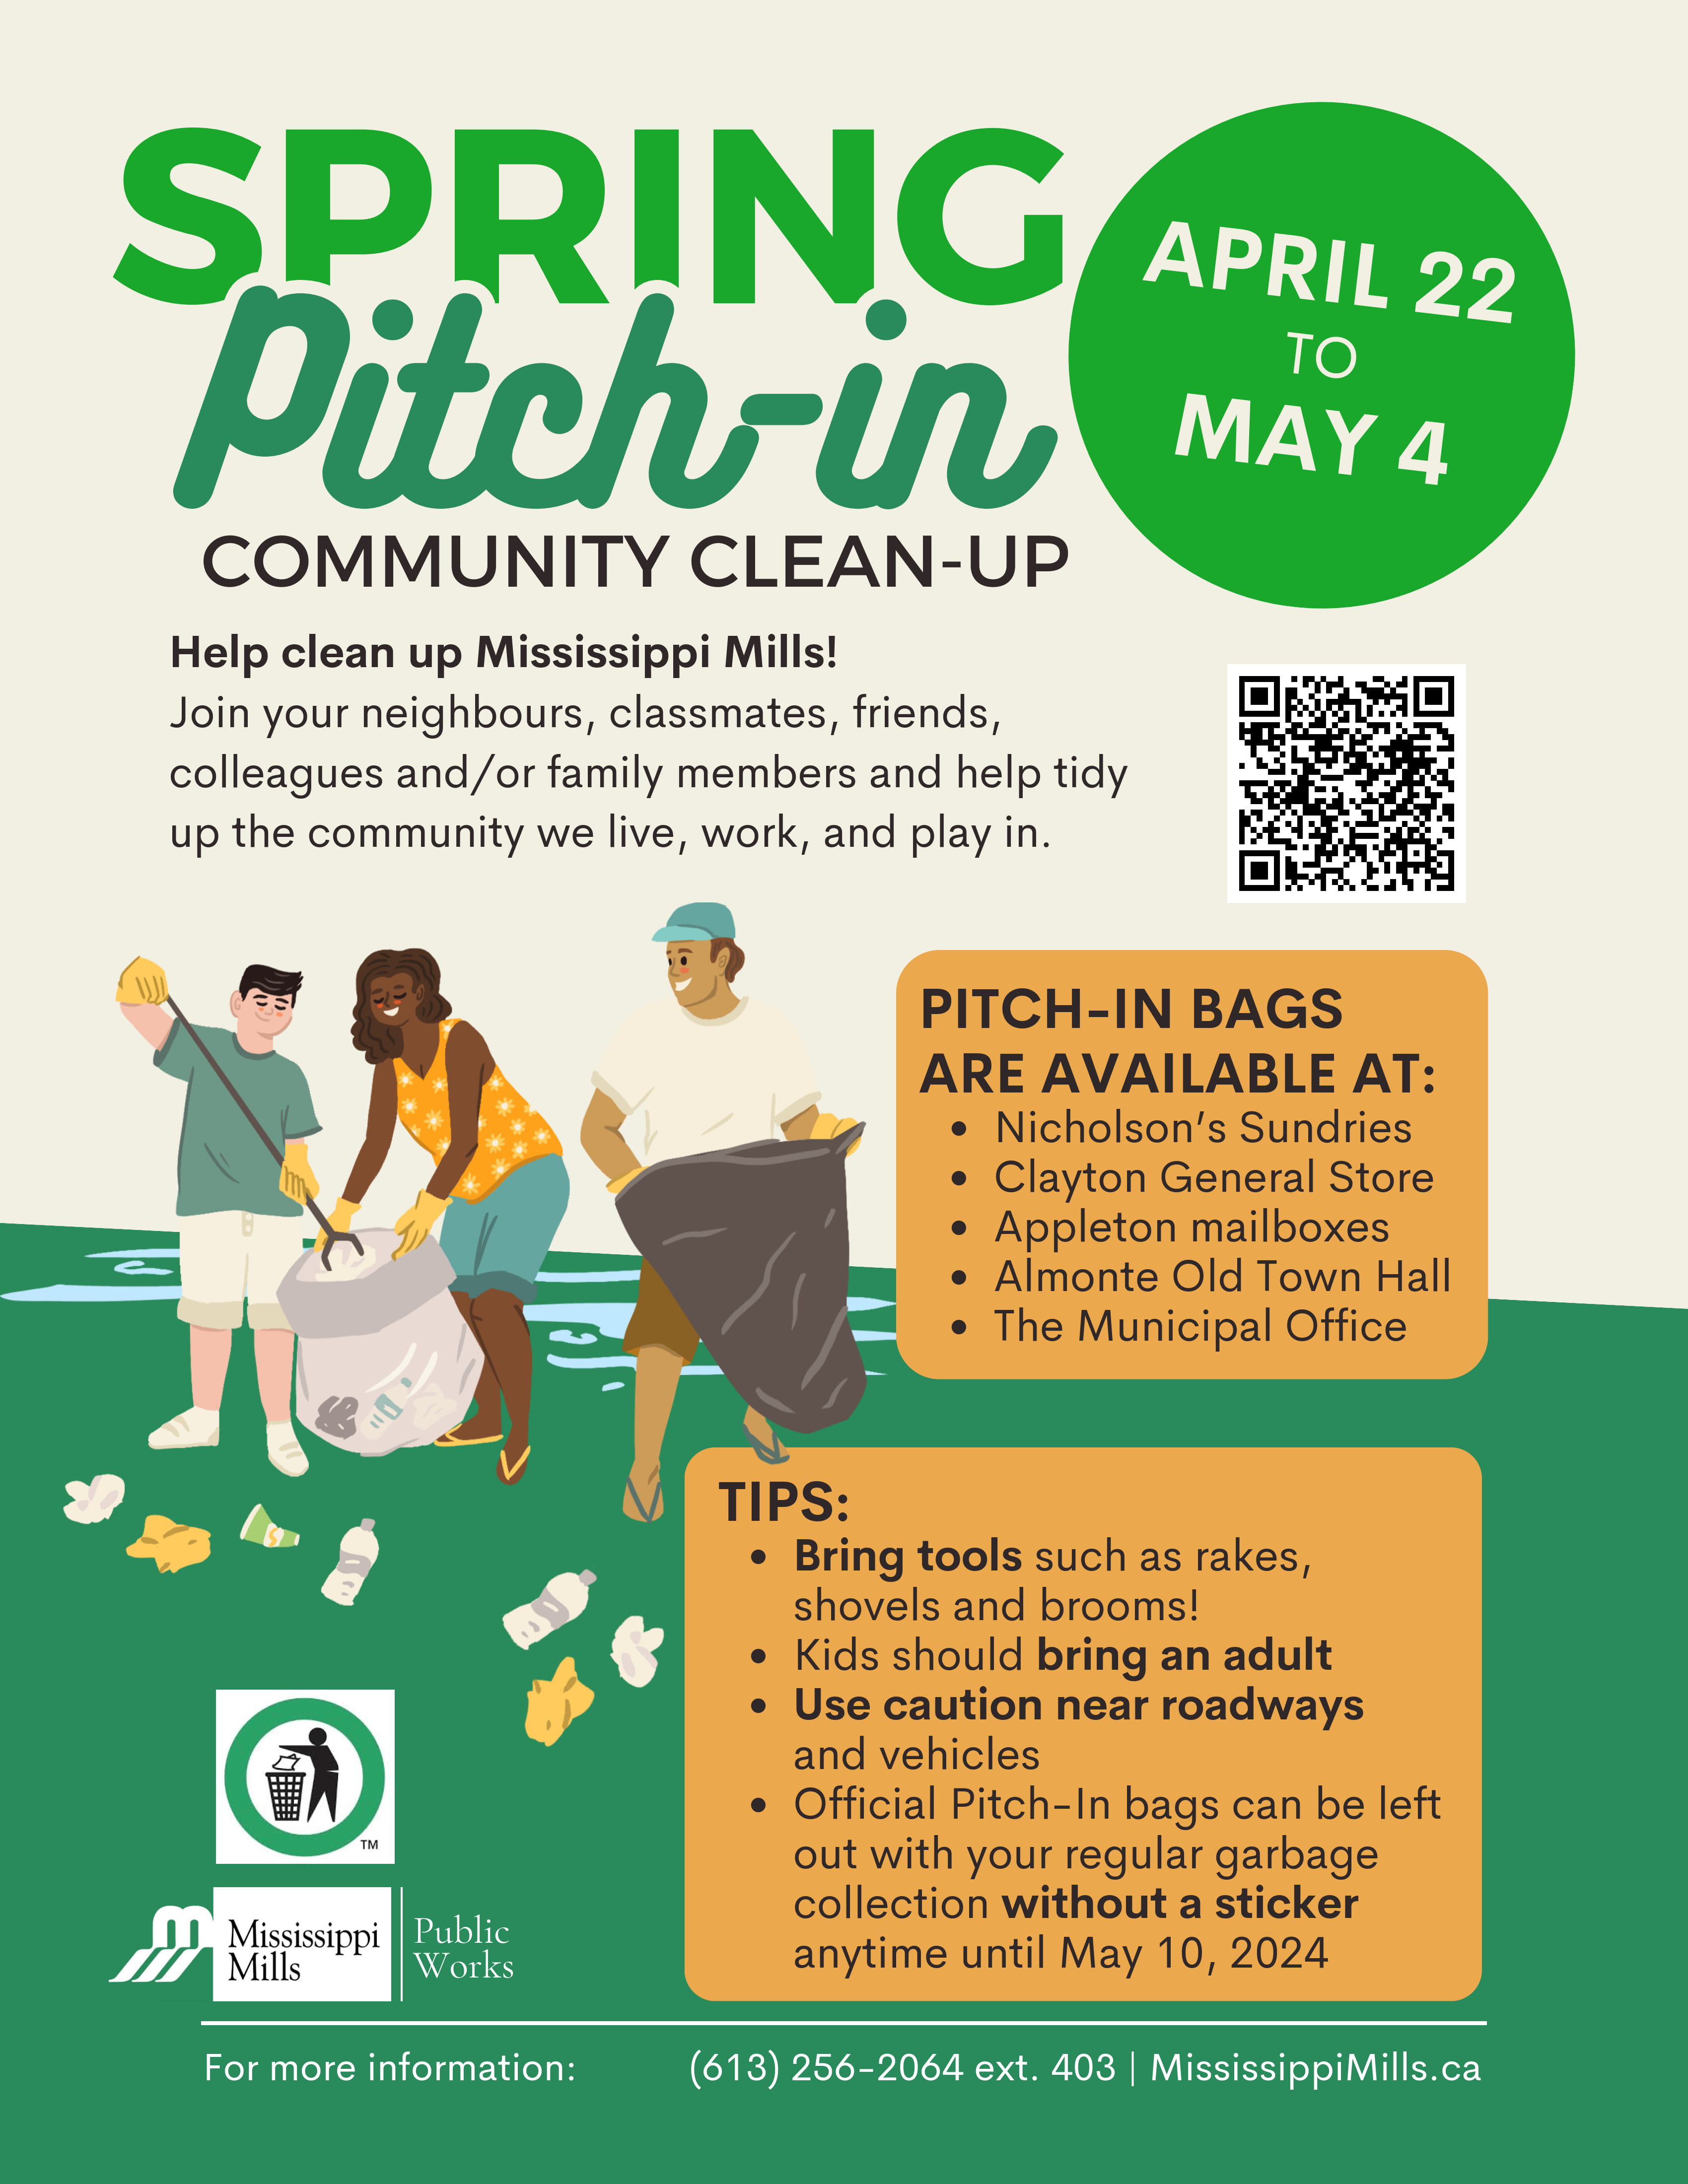 Poster advertising spring cleanup